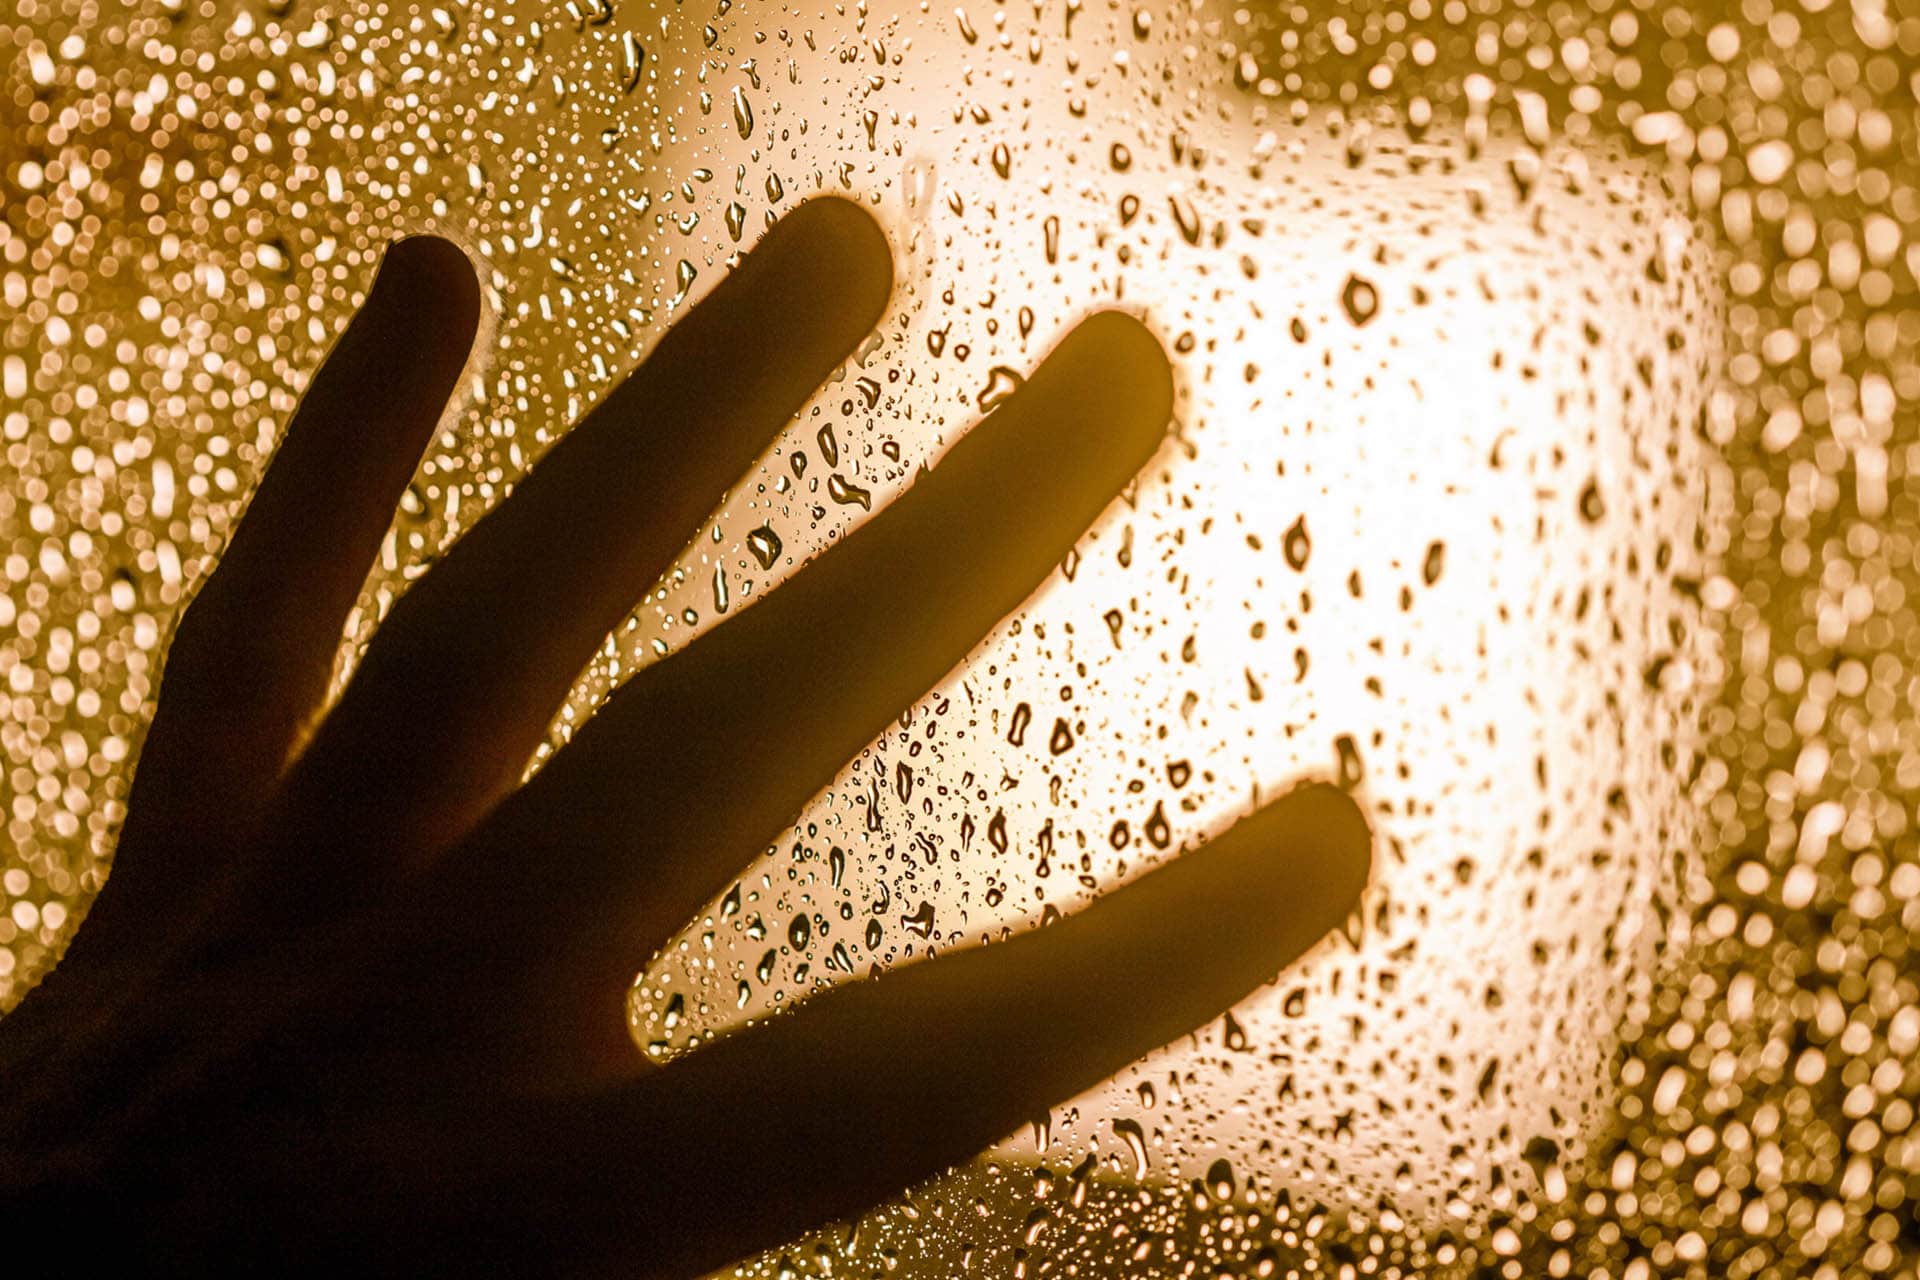 Silhouette of a hand on a window with rain drops